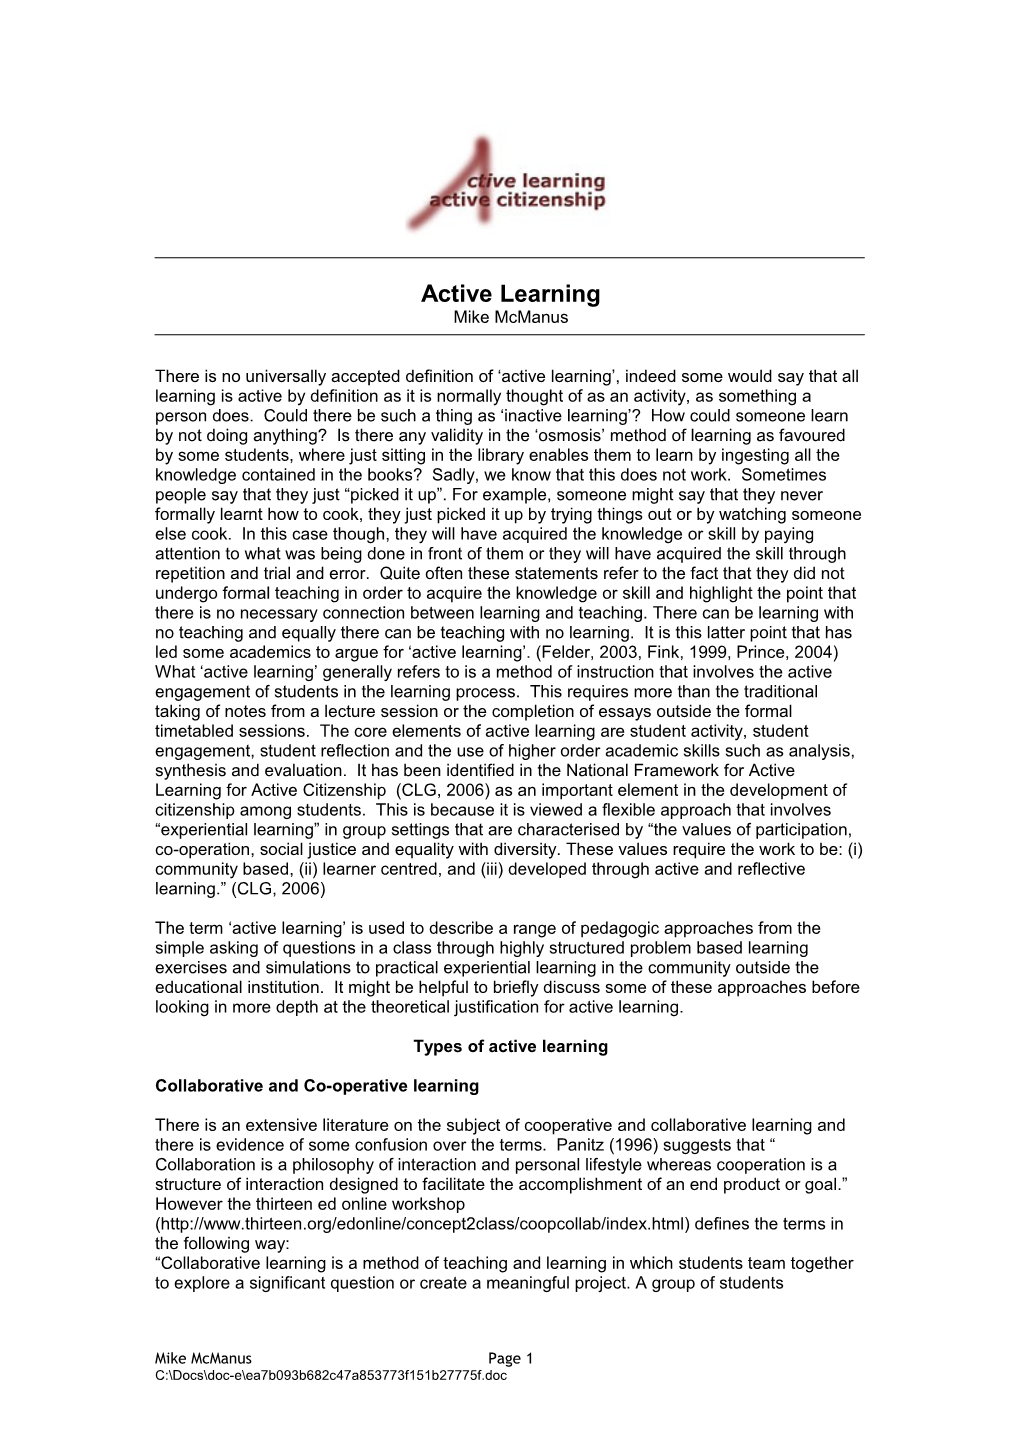 Collaborative and Co-Operative Learning